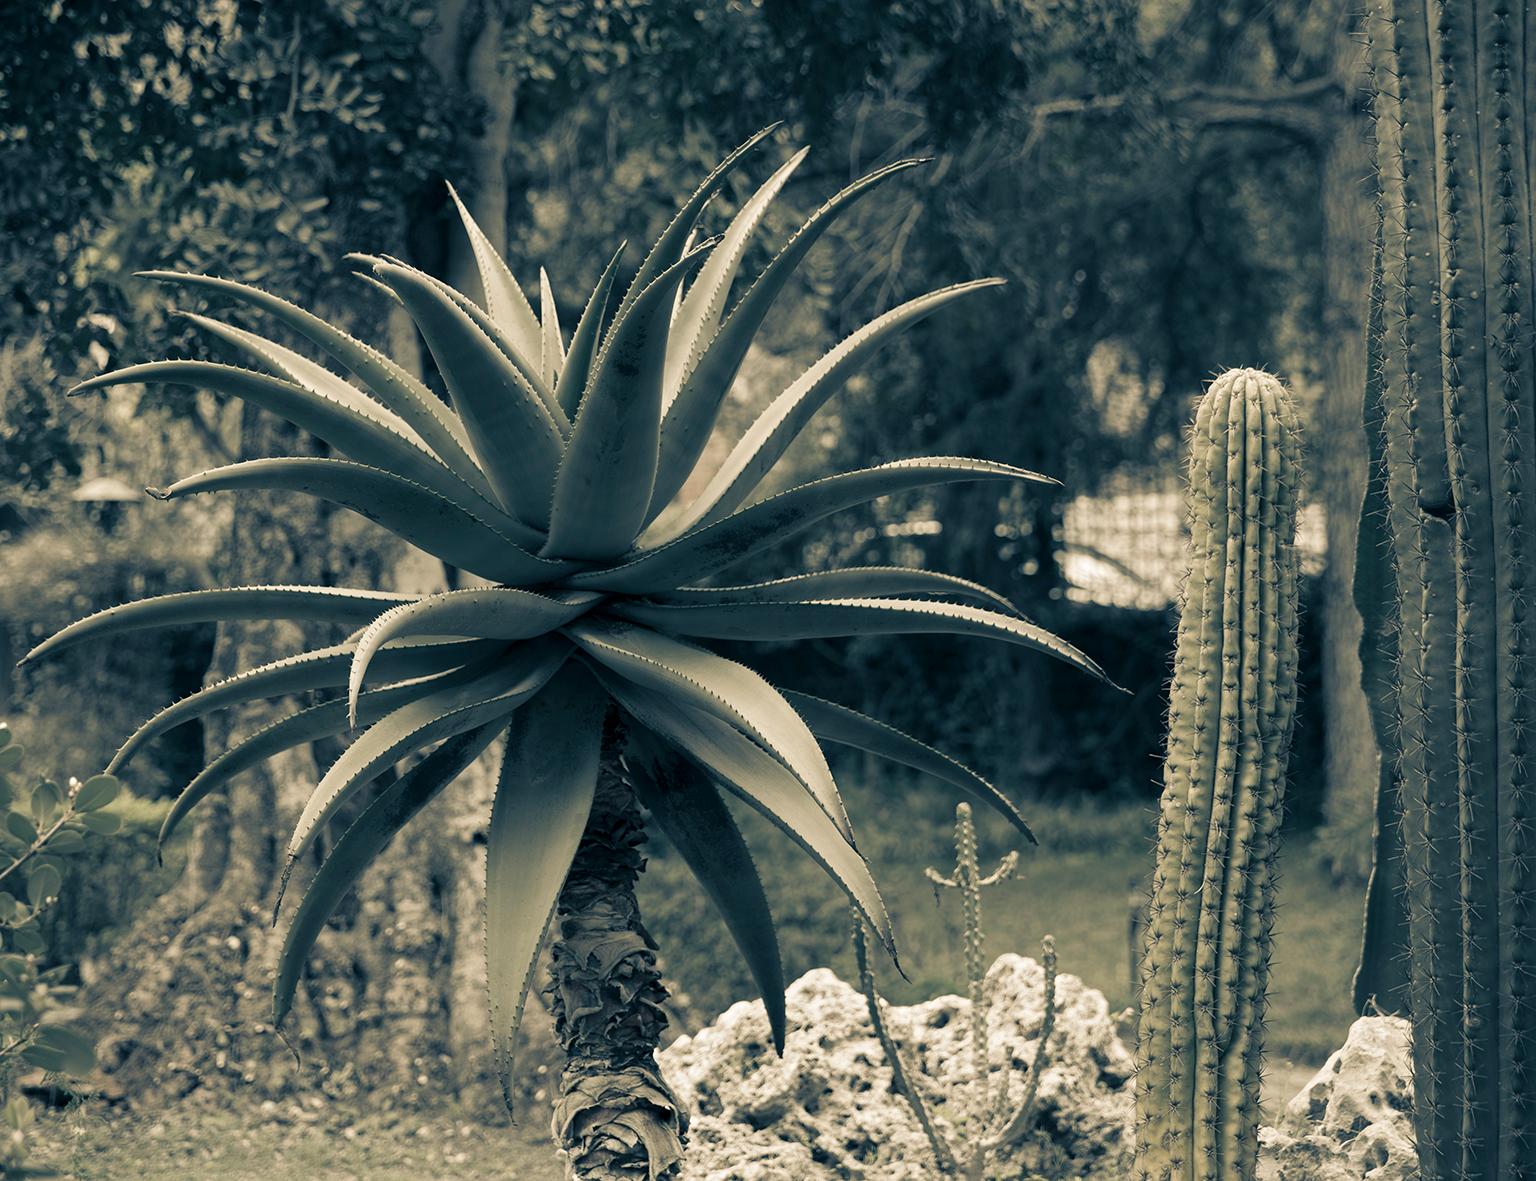  Cosmo Condina Black and White Photograph - Yucca Plant, Italy, 2017